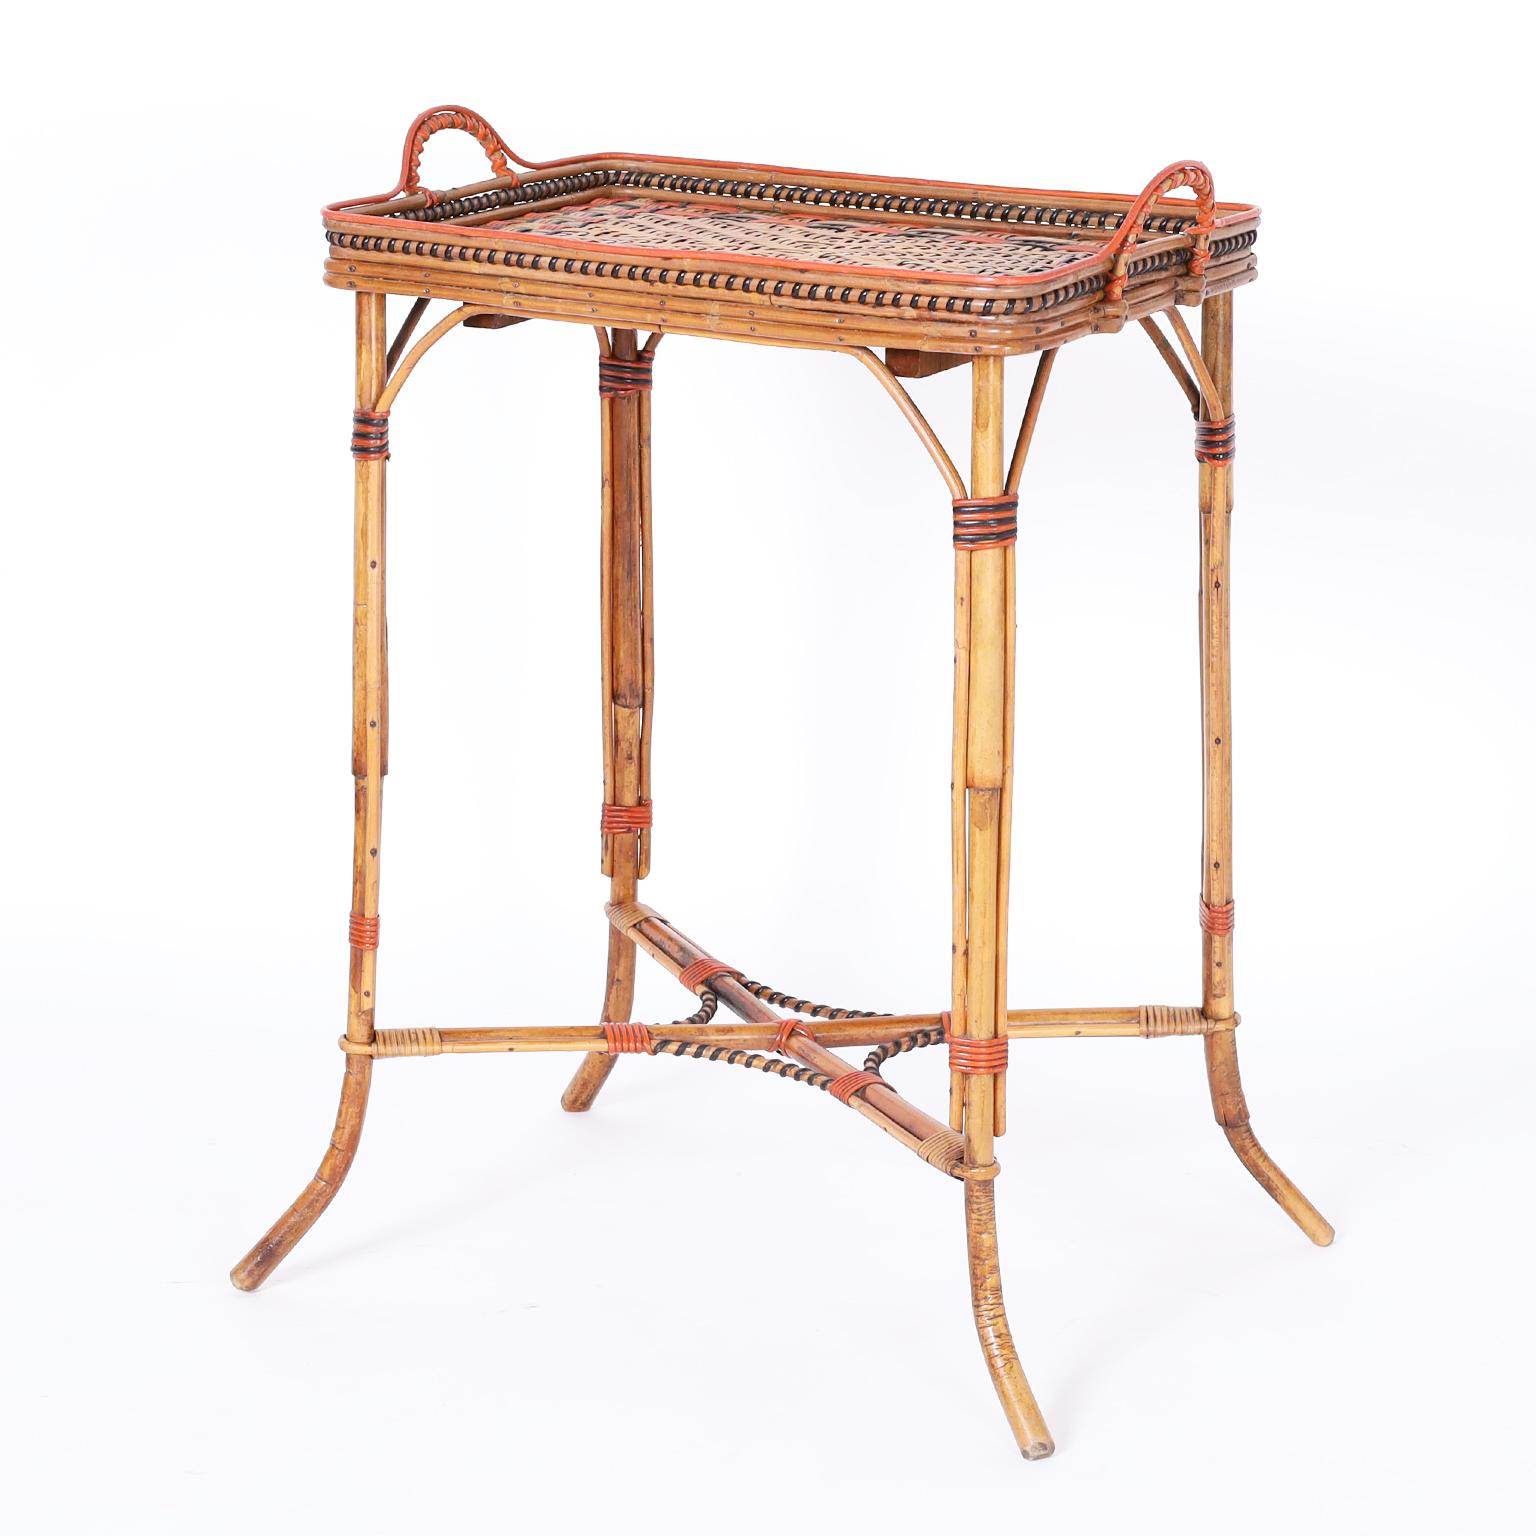 Serving stand or bar featuring a rattan and painted rattan tray style top with a herringbone center bordered by geometric designs and wrapped handled. The bamboo base has reed highlights and splayed feet.